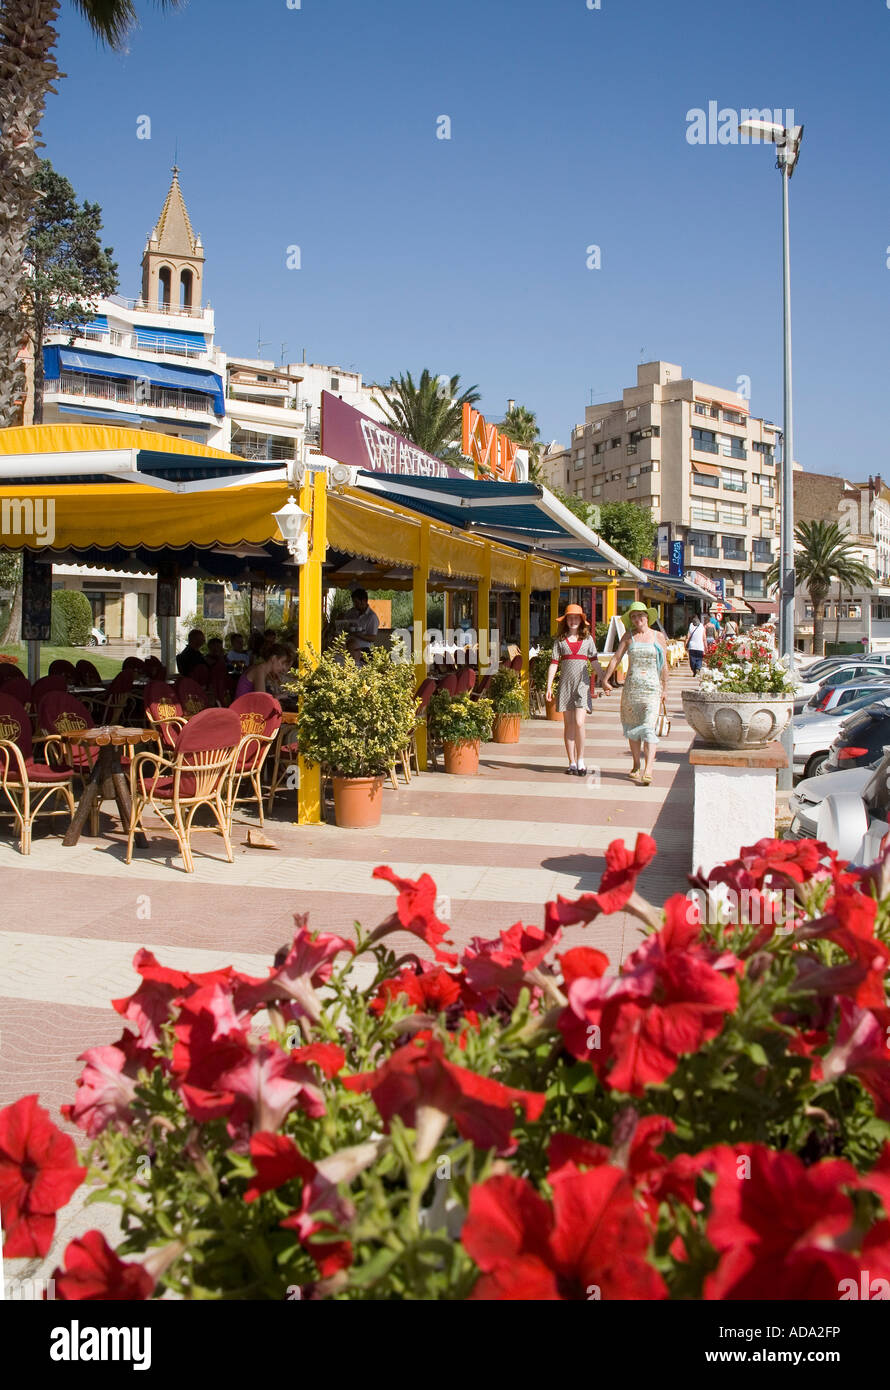 The town of Palamos on the Costa Brava in Spain Stock Photo